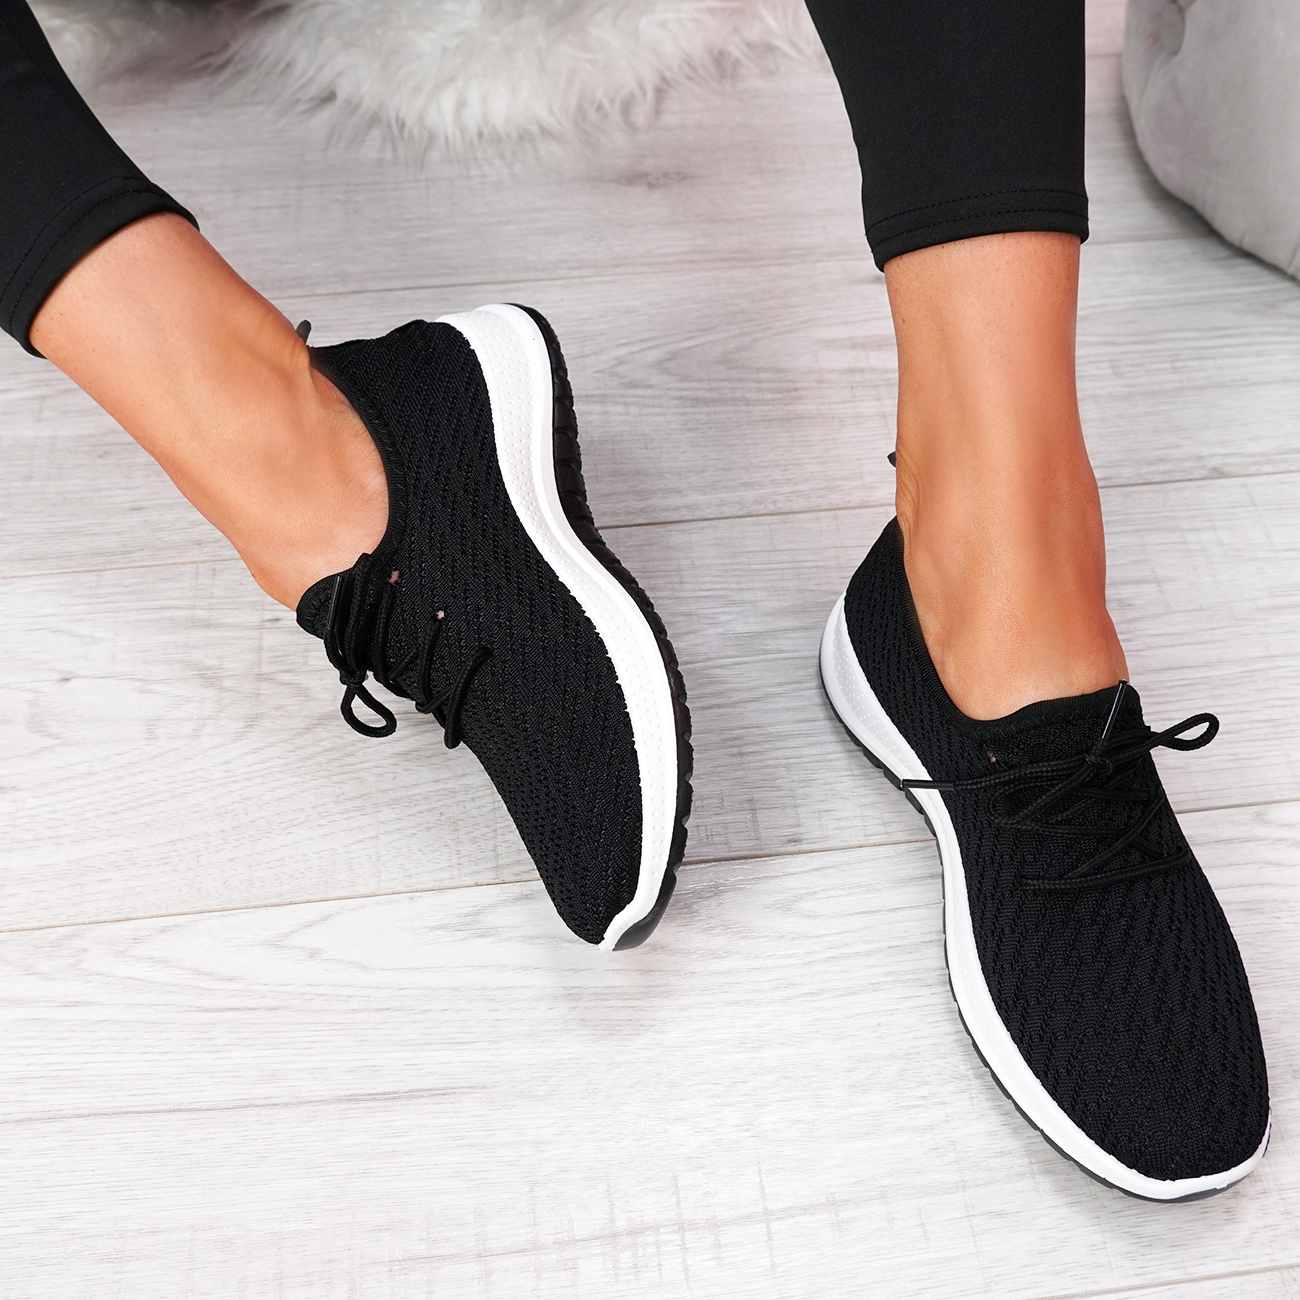 WOMENS LADIES KNIT TRAINERS SLIP ON SPORT SNEAKERS CASUAL RUNNING WOMEN ...